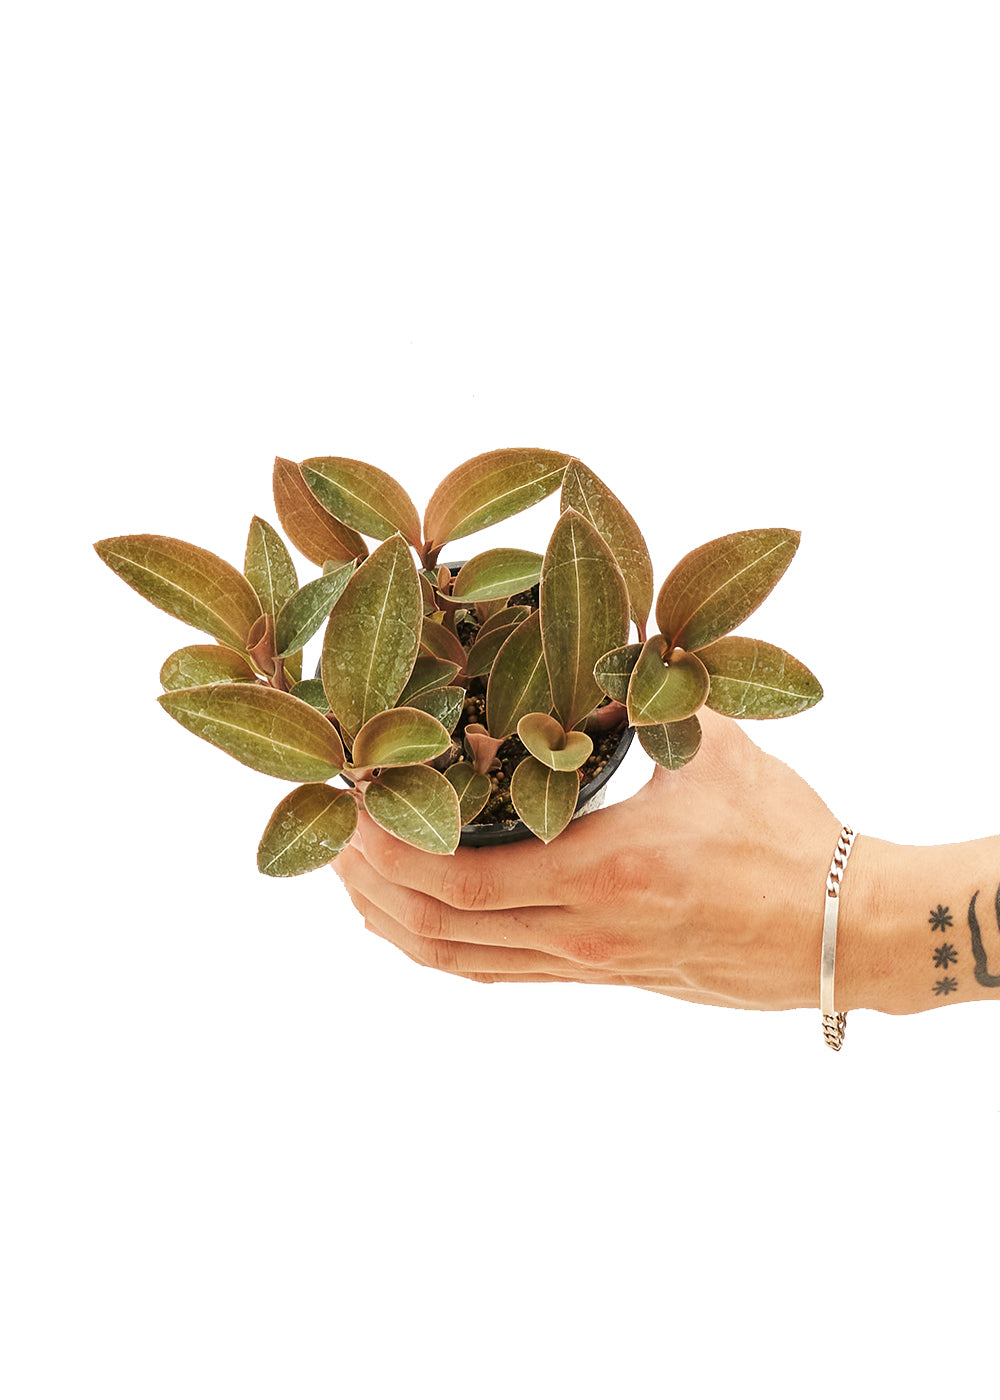 Small size Jewel Orchid 'Discolor' Plant in a growers pot with a white background with a hand holding the pot showing the top view